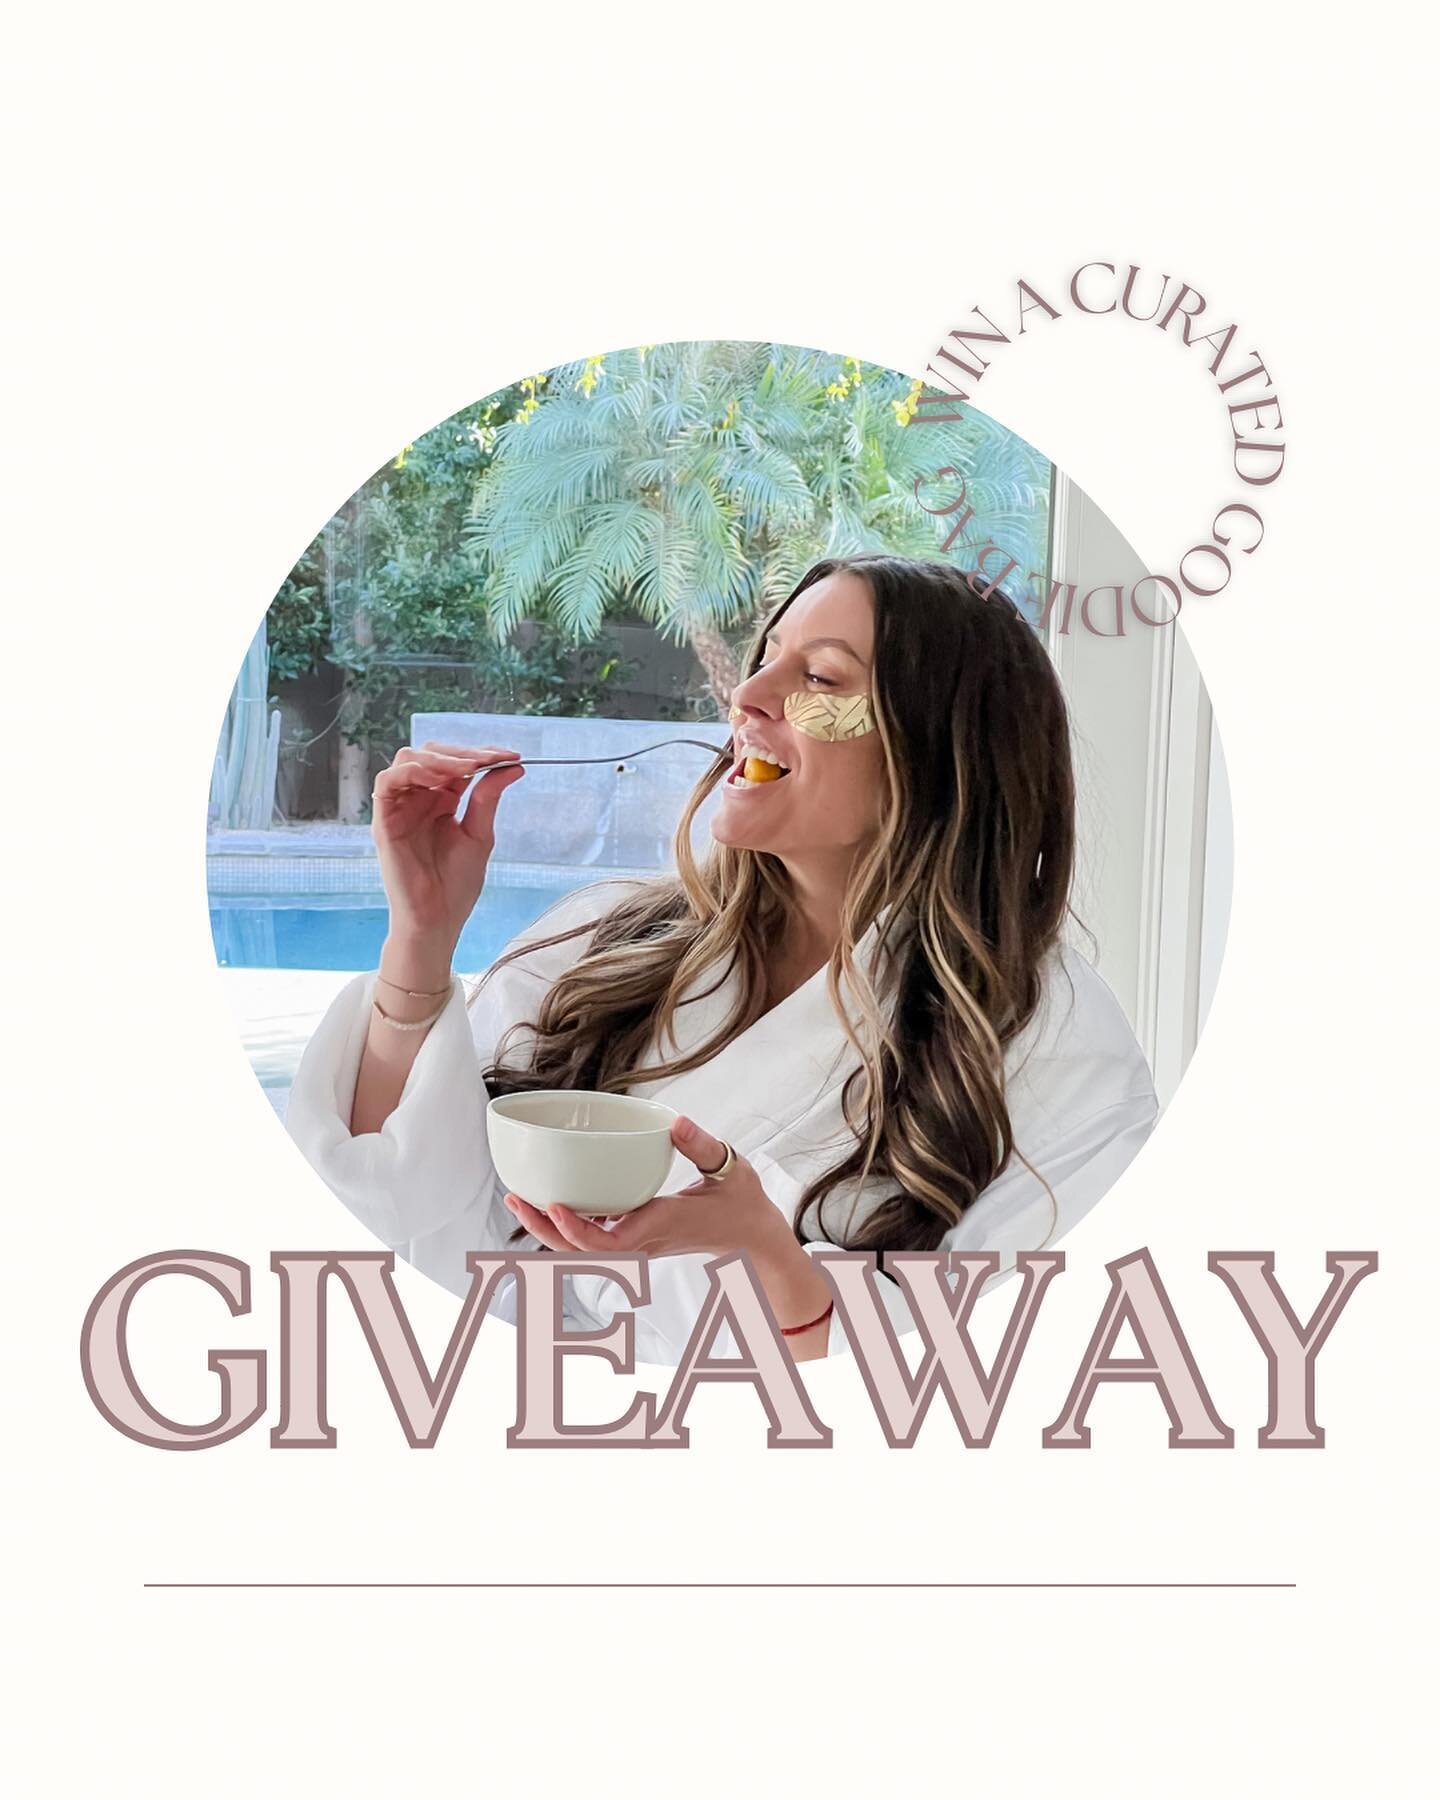 💫 GIVEAWAY 💫 

Feeling like you could use some wellness in your life? 

If you know me you know I&rsquo;m all about having the best. I&rsquo;m a 5/1 in human design and that means I do a TON of research &amp; become an expert in anything I&rsquo;m 